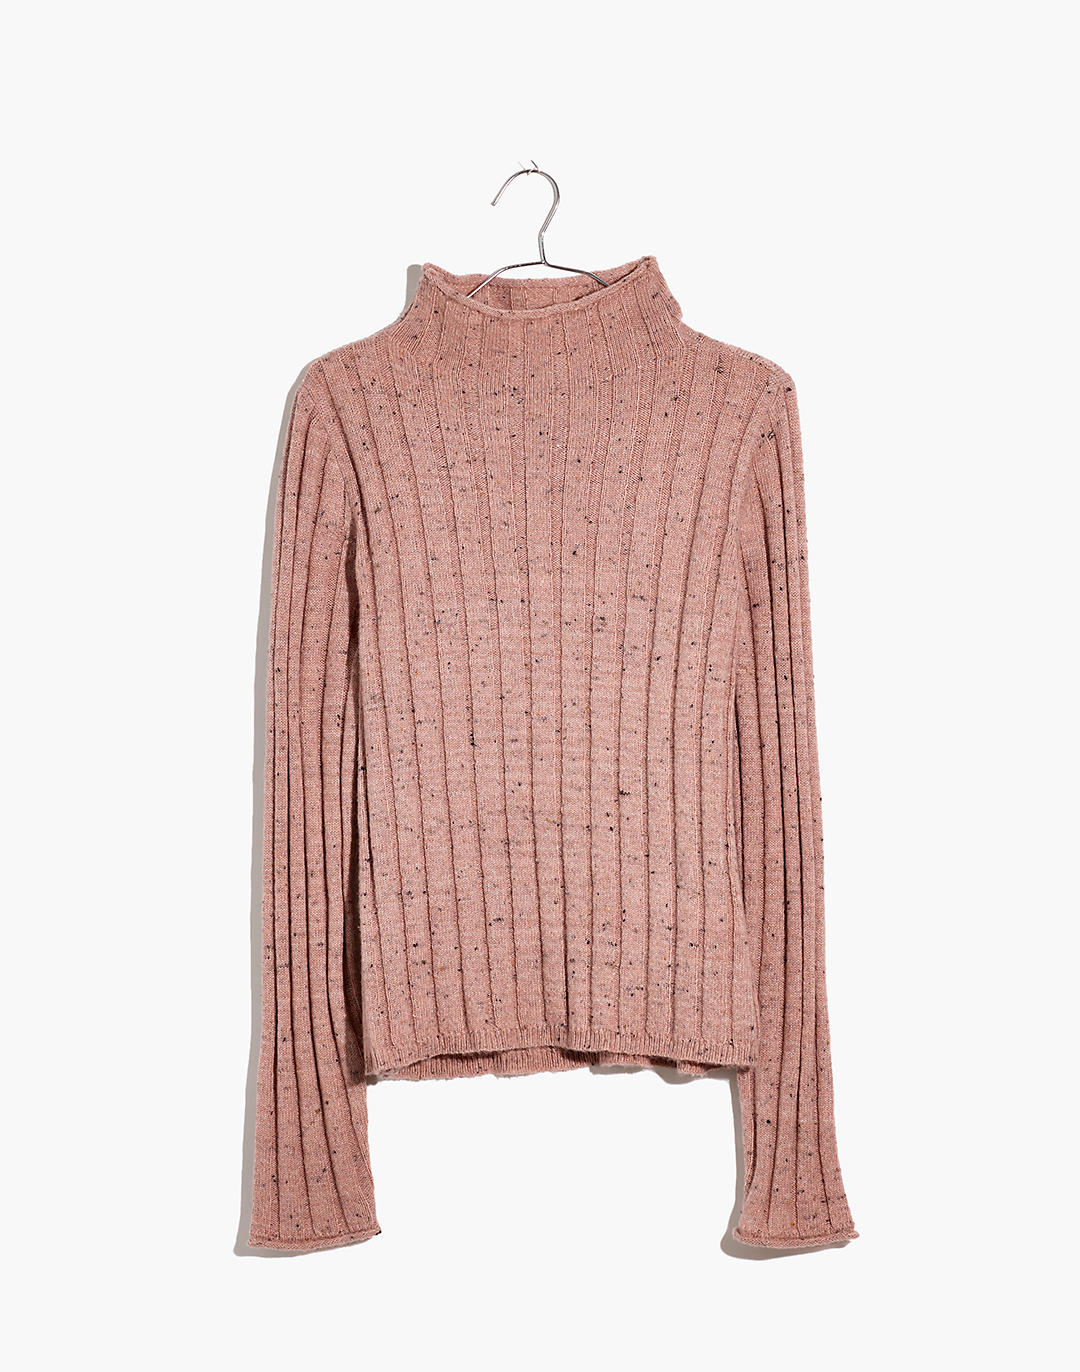 Madewell Sweater Donegal Evercrest Turtleneck Flecked Ribbed Coziest Yarn NWT